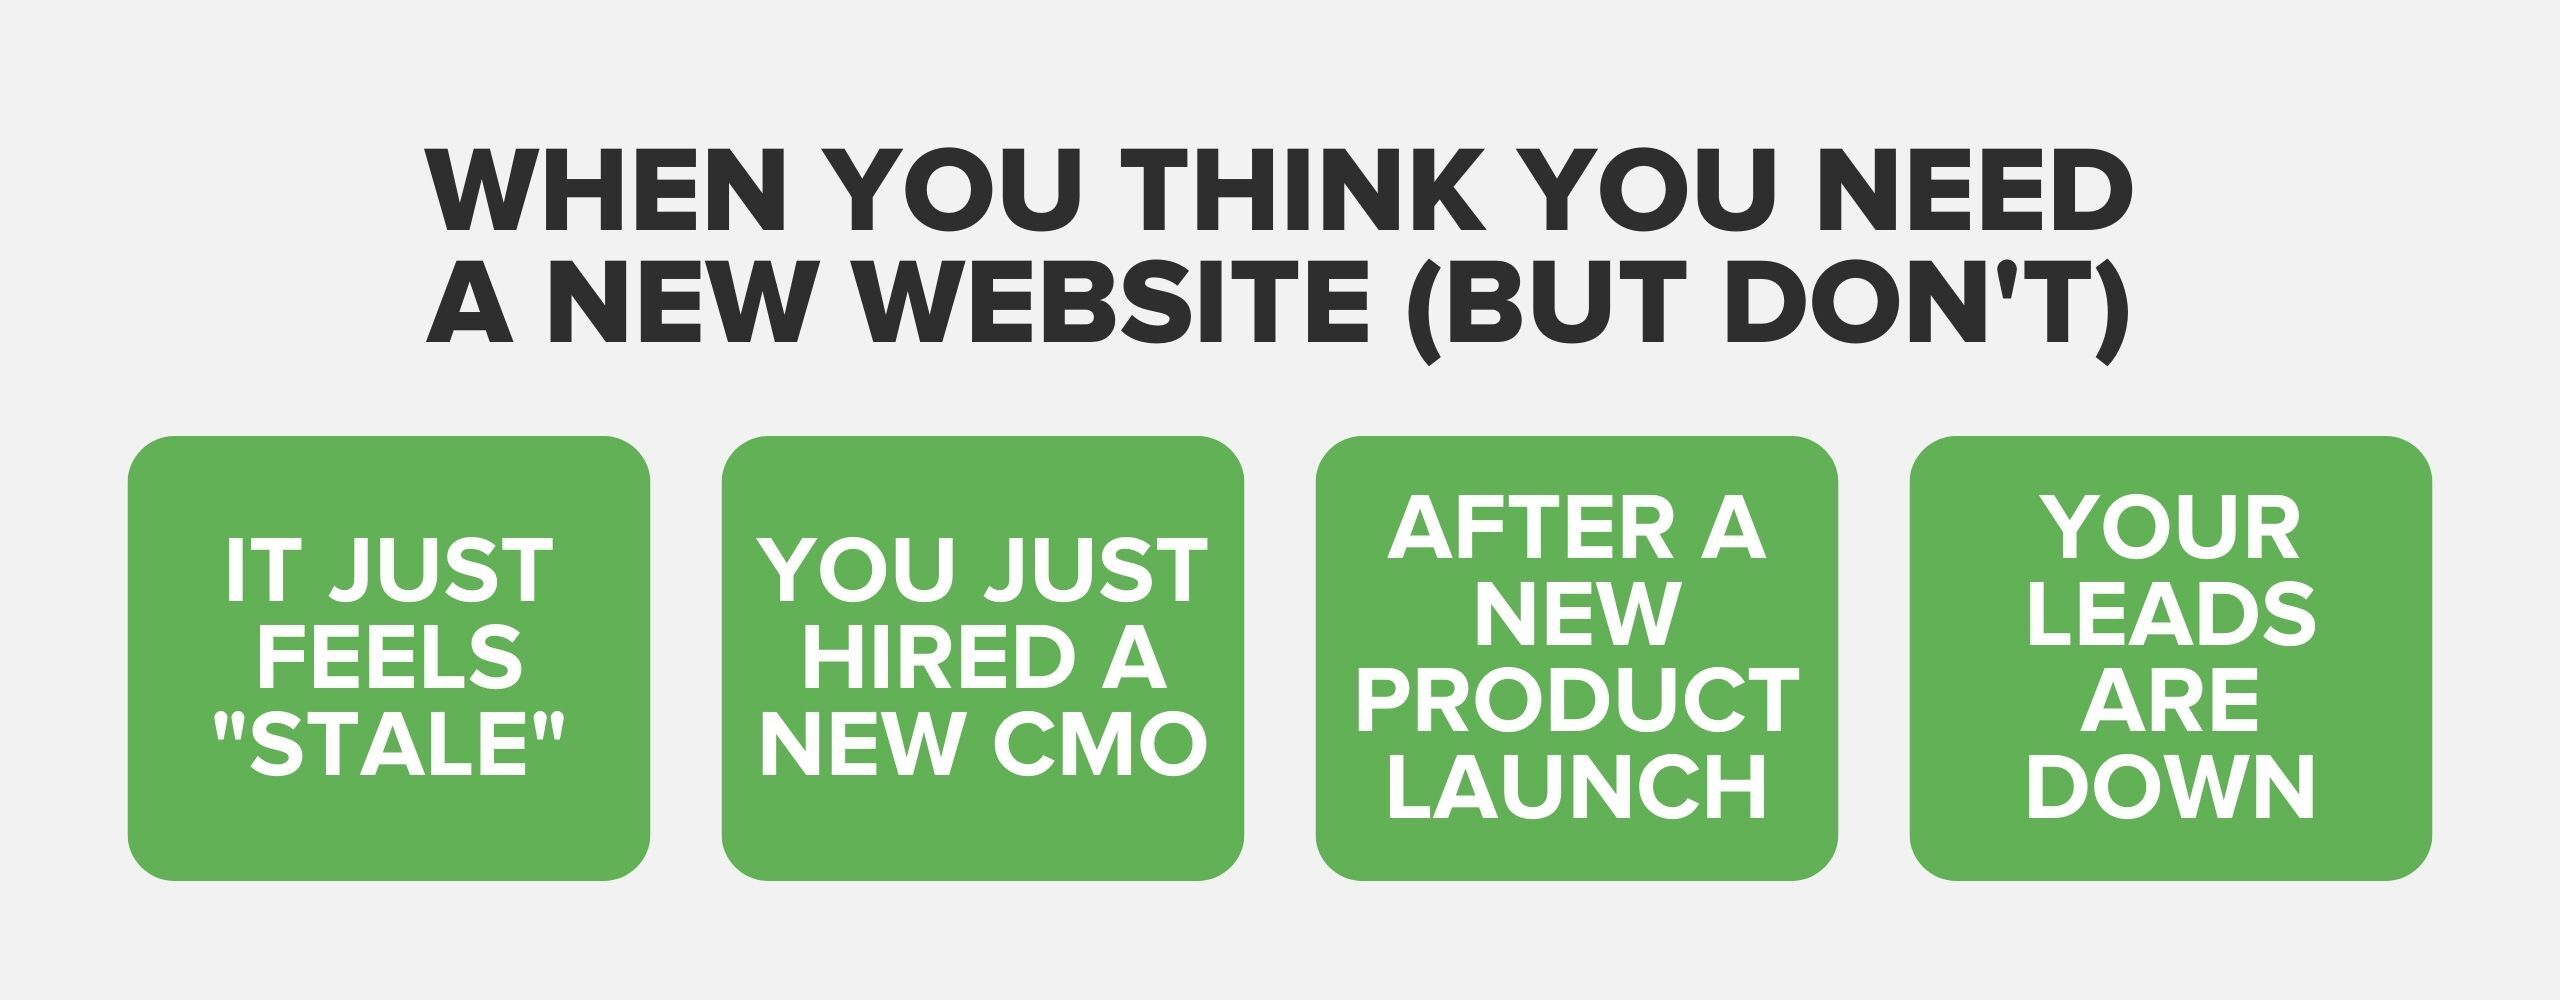 Business Tools - You Probably Don’t Need a New Website